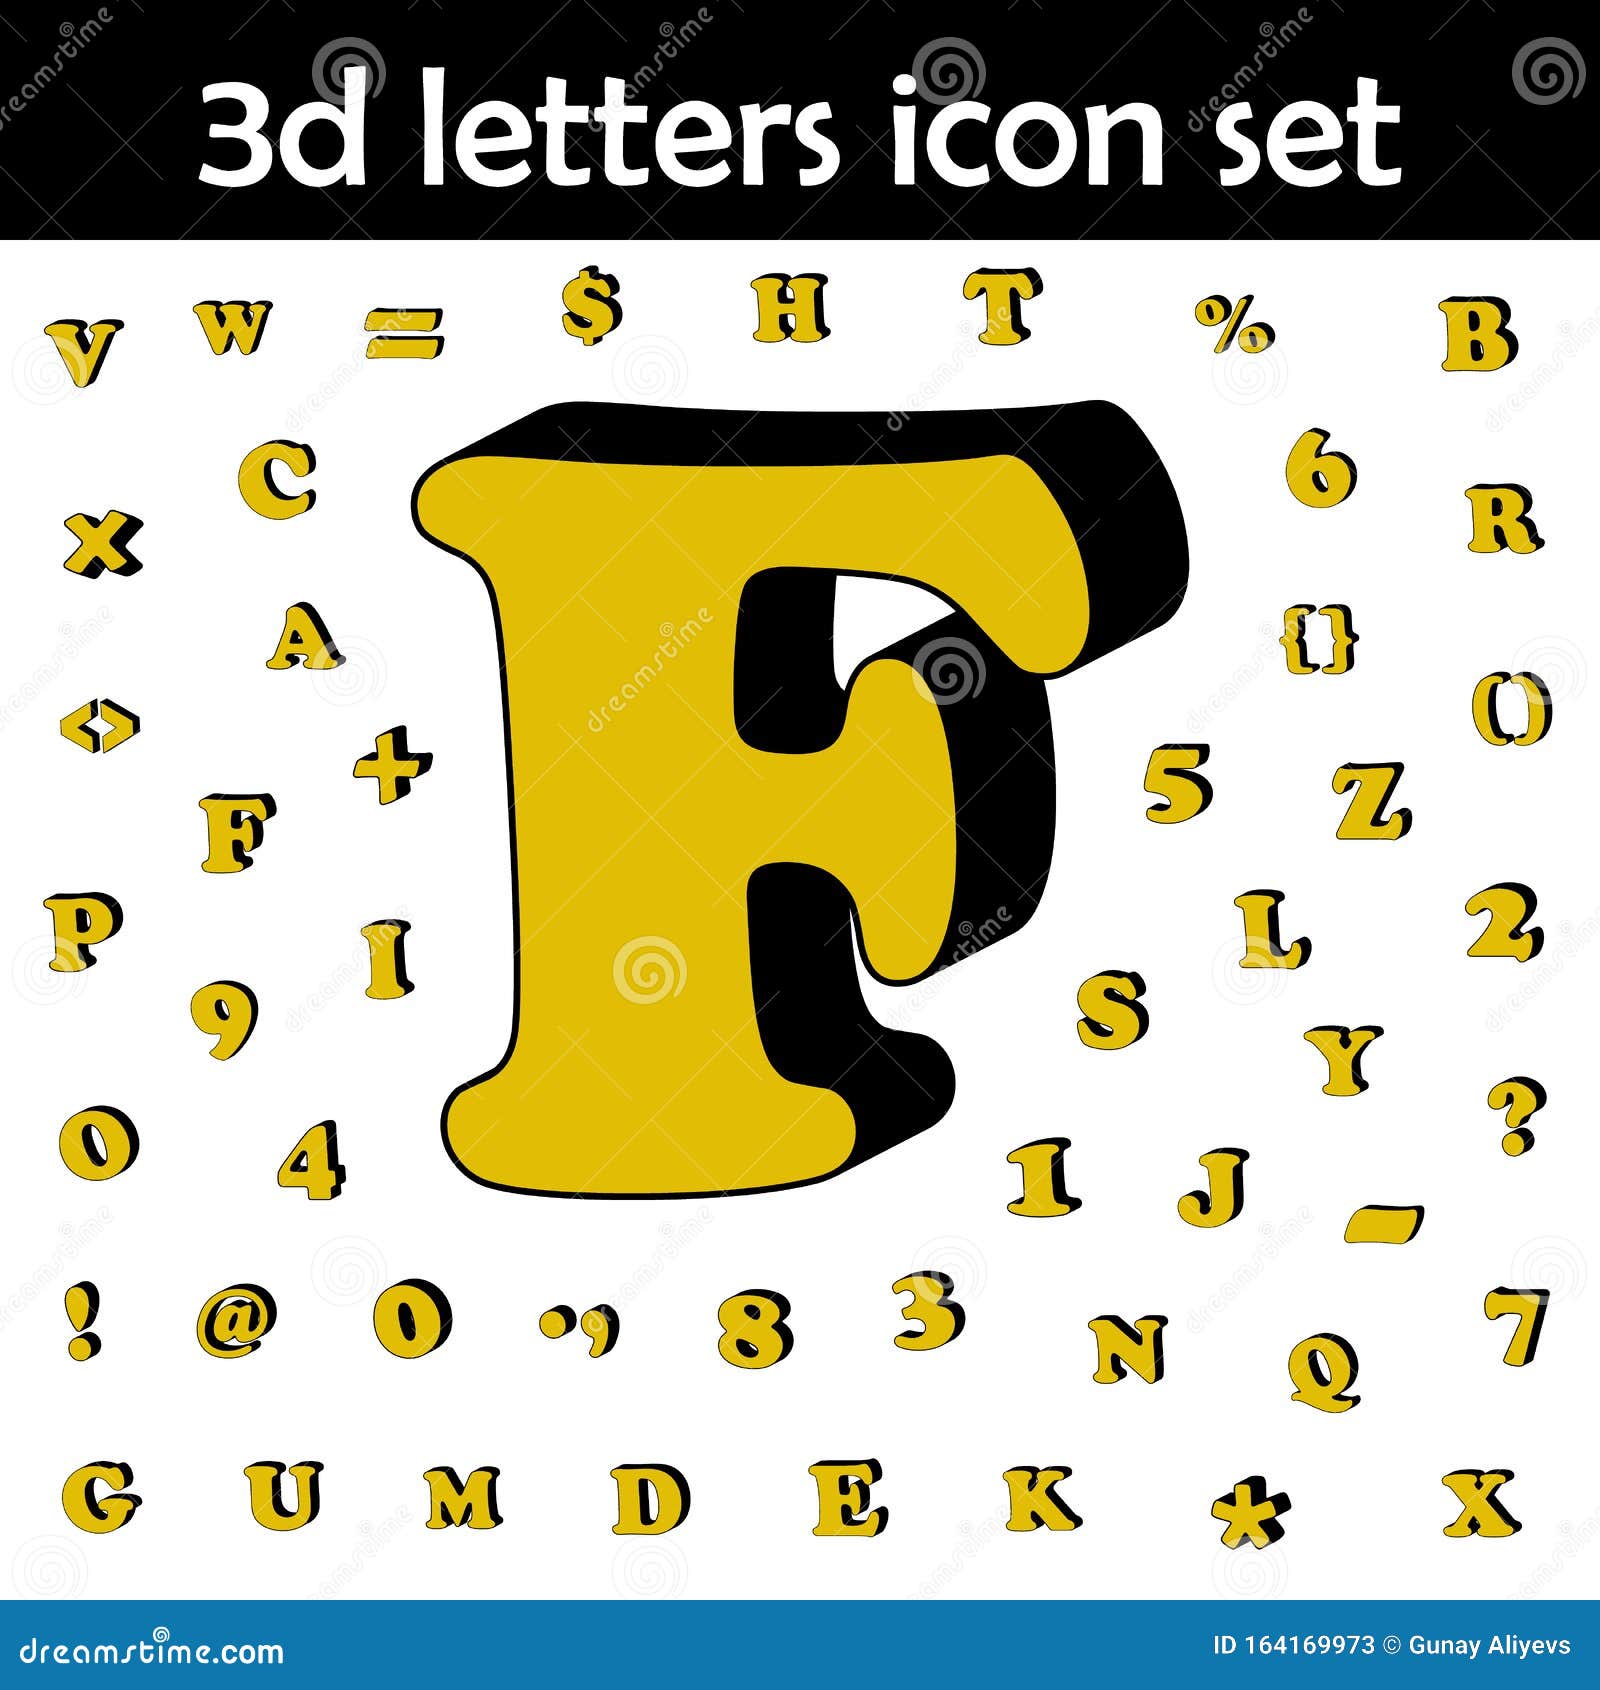 Letter F Alphabet 3d Icon 3d Words Letters Icons Universal Set For Web And Mobile Stock Illustration Illustration Of Text Element 164169973